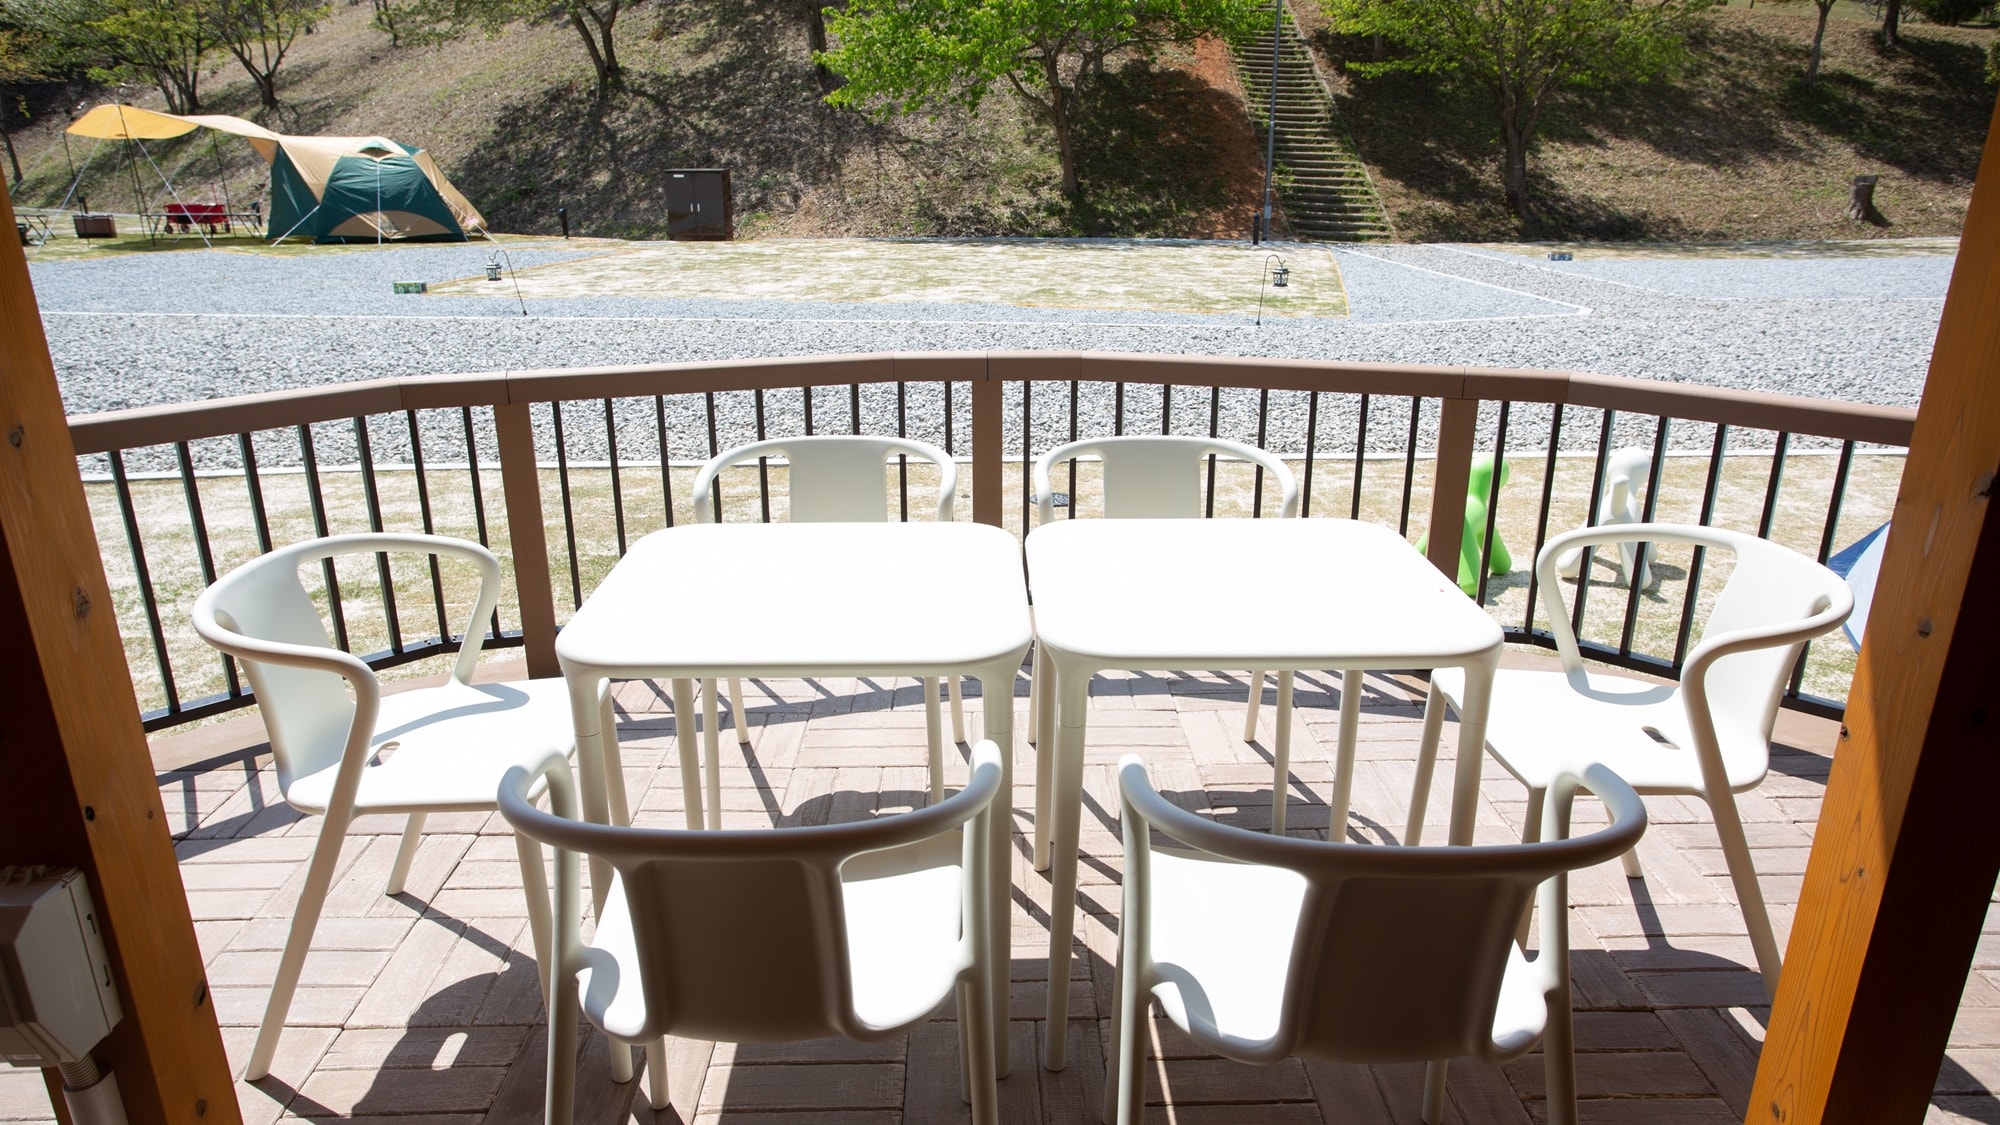 * [Grand Cabin] The deck is sunny. It is the best space for sunbathing as well as BBQ.